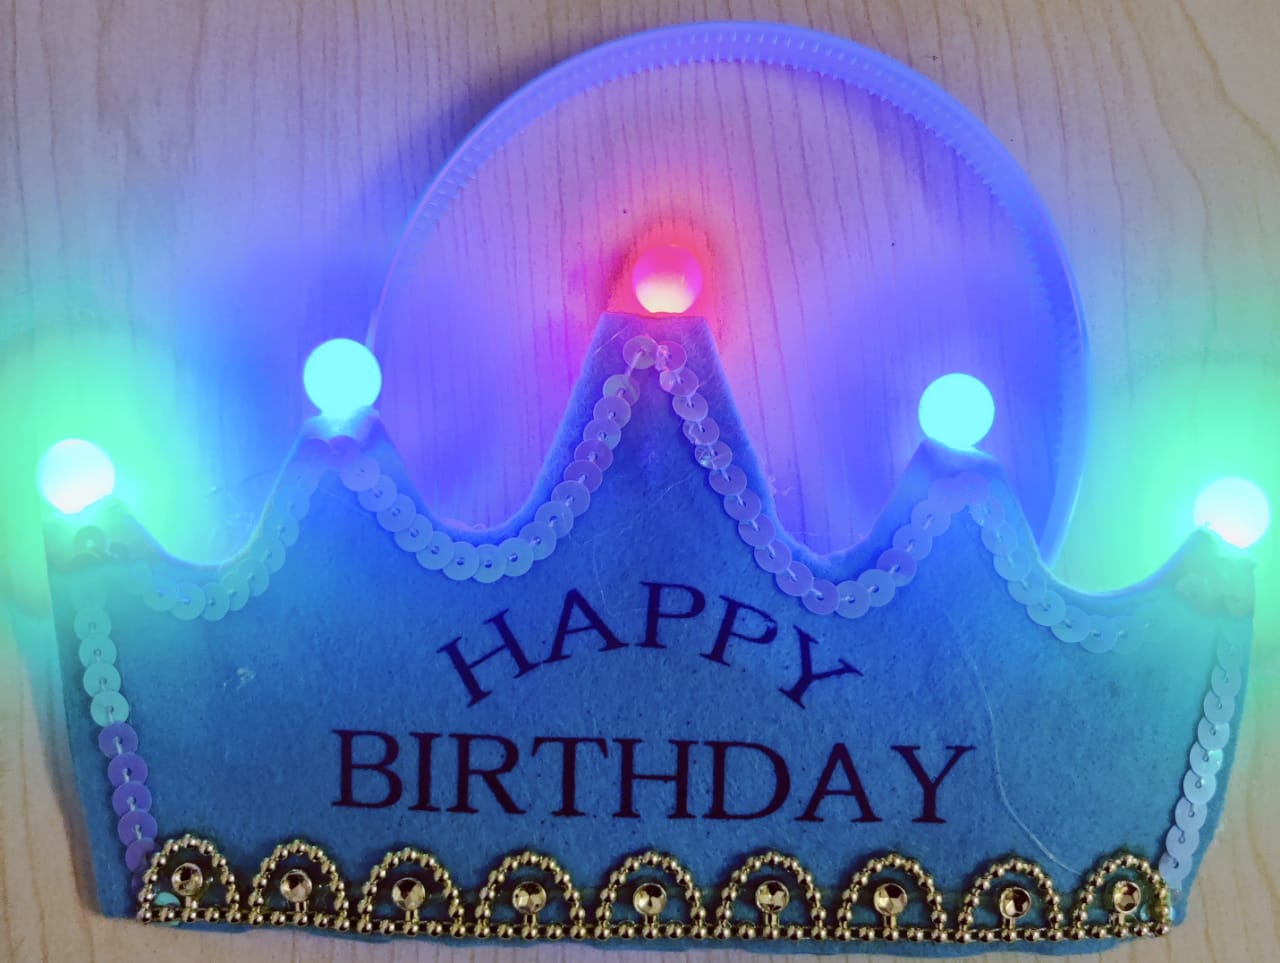 Happy Birthday Beautiful Crown with Colorful Led Lights for Kids Children Boys &amp; Girls (Blue)